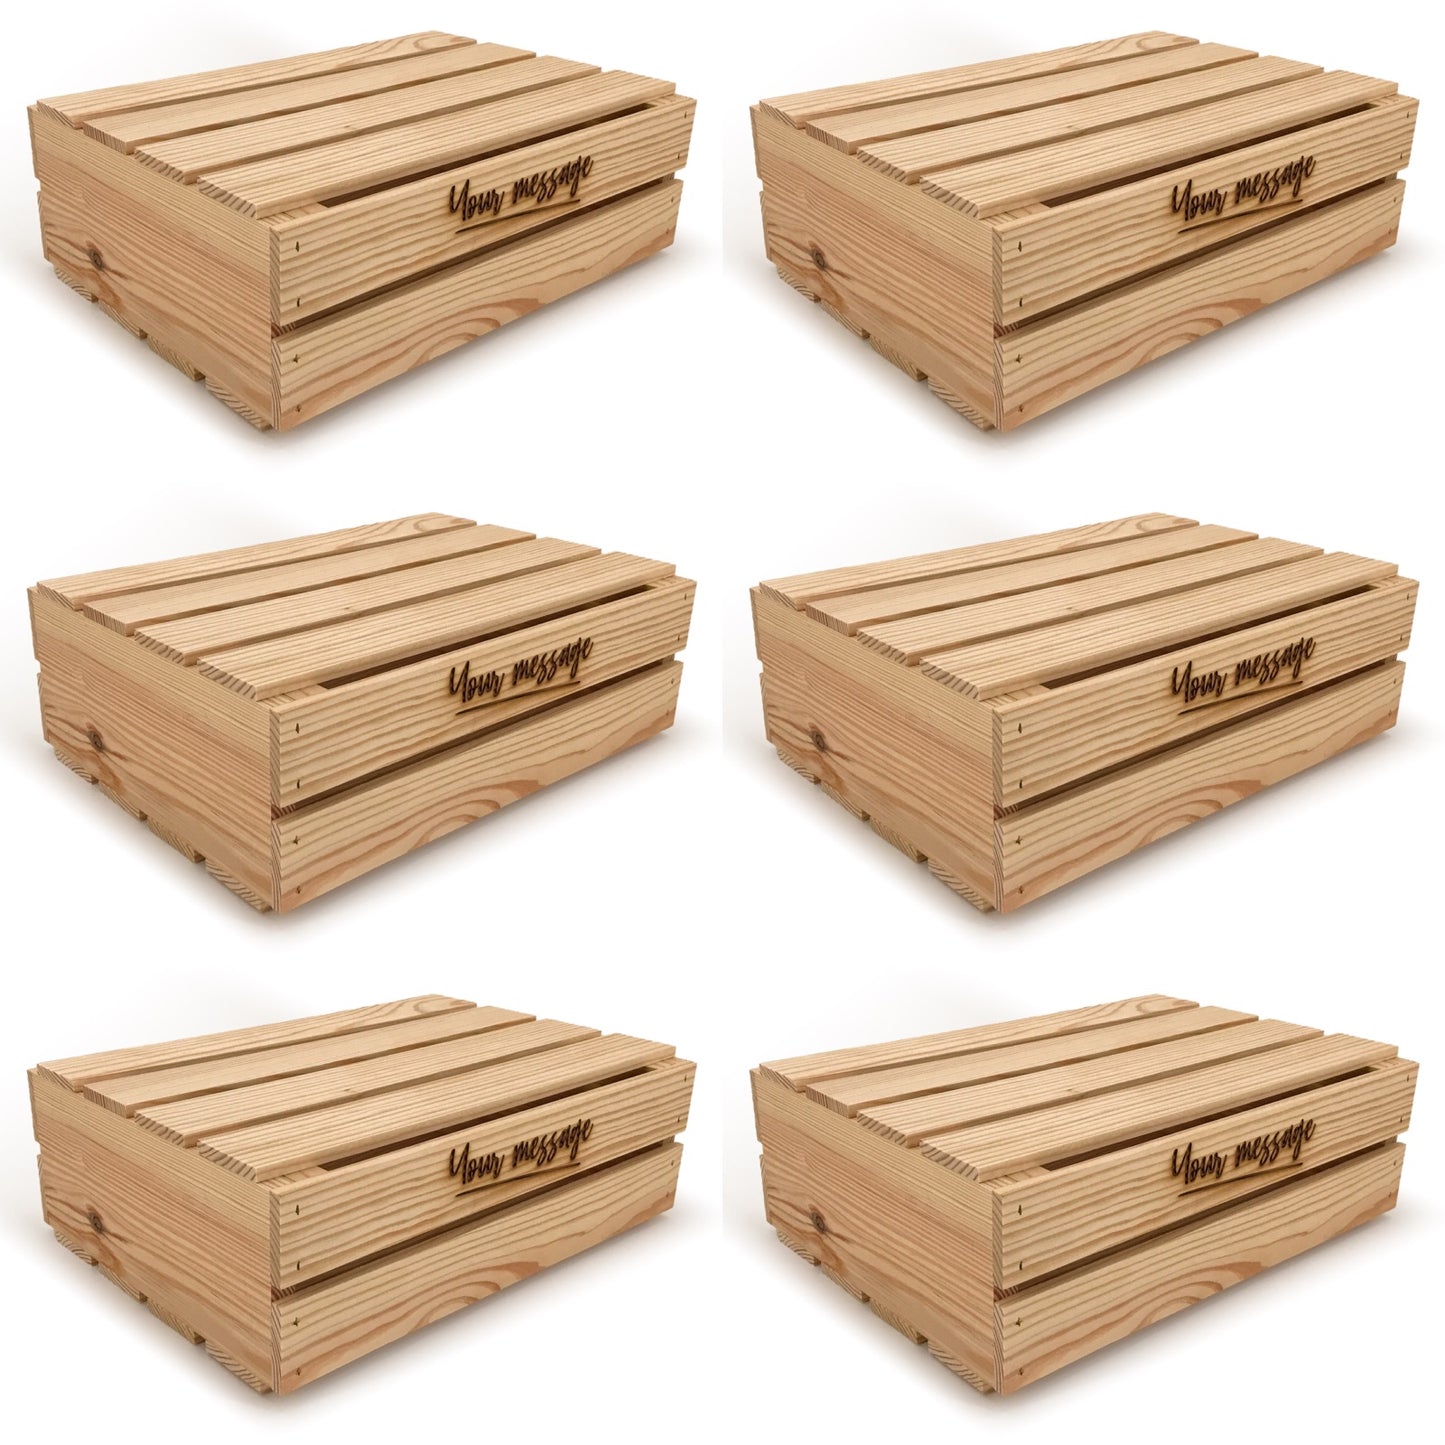 6 Small wooden crates with lid and custom message 16x12x5.25